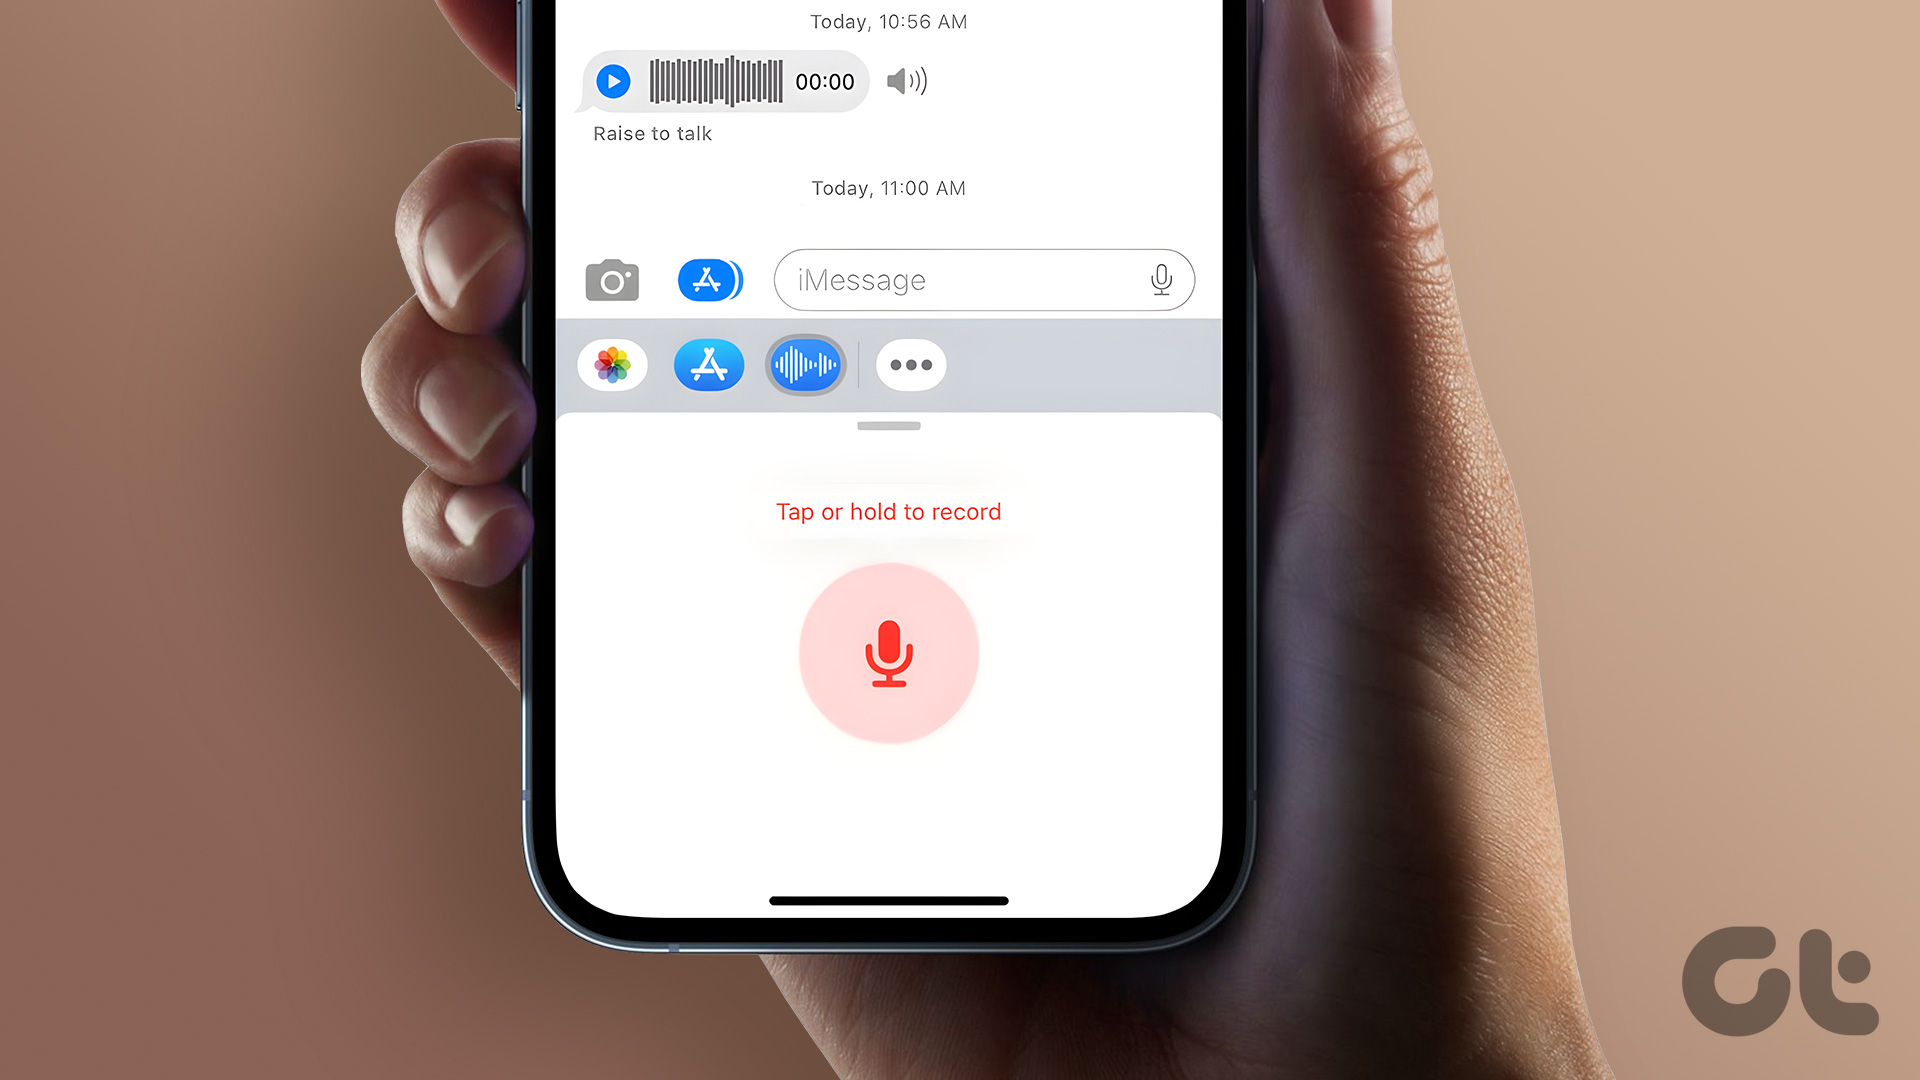 How to Send Voice message in iPhone